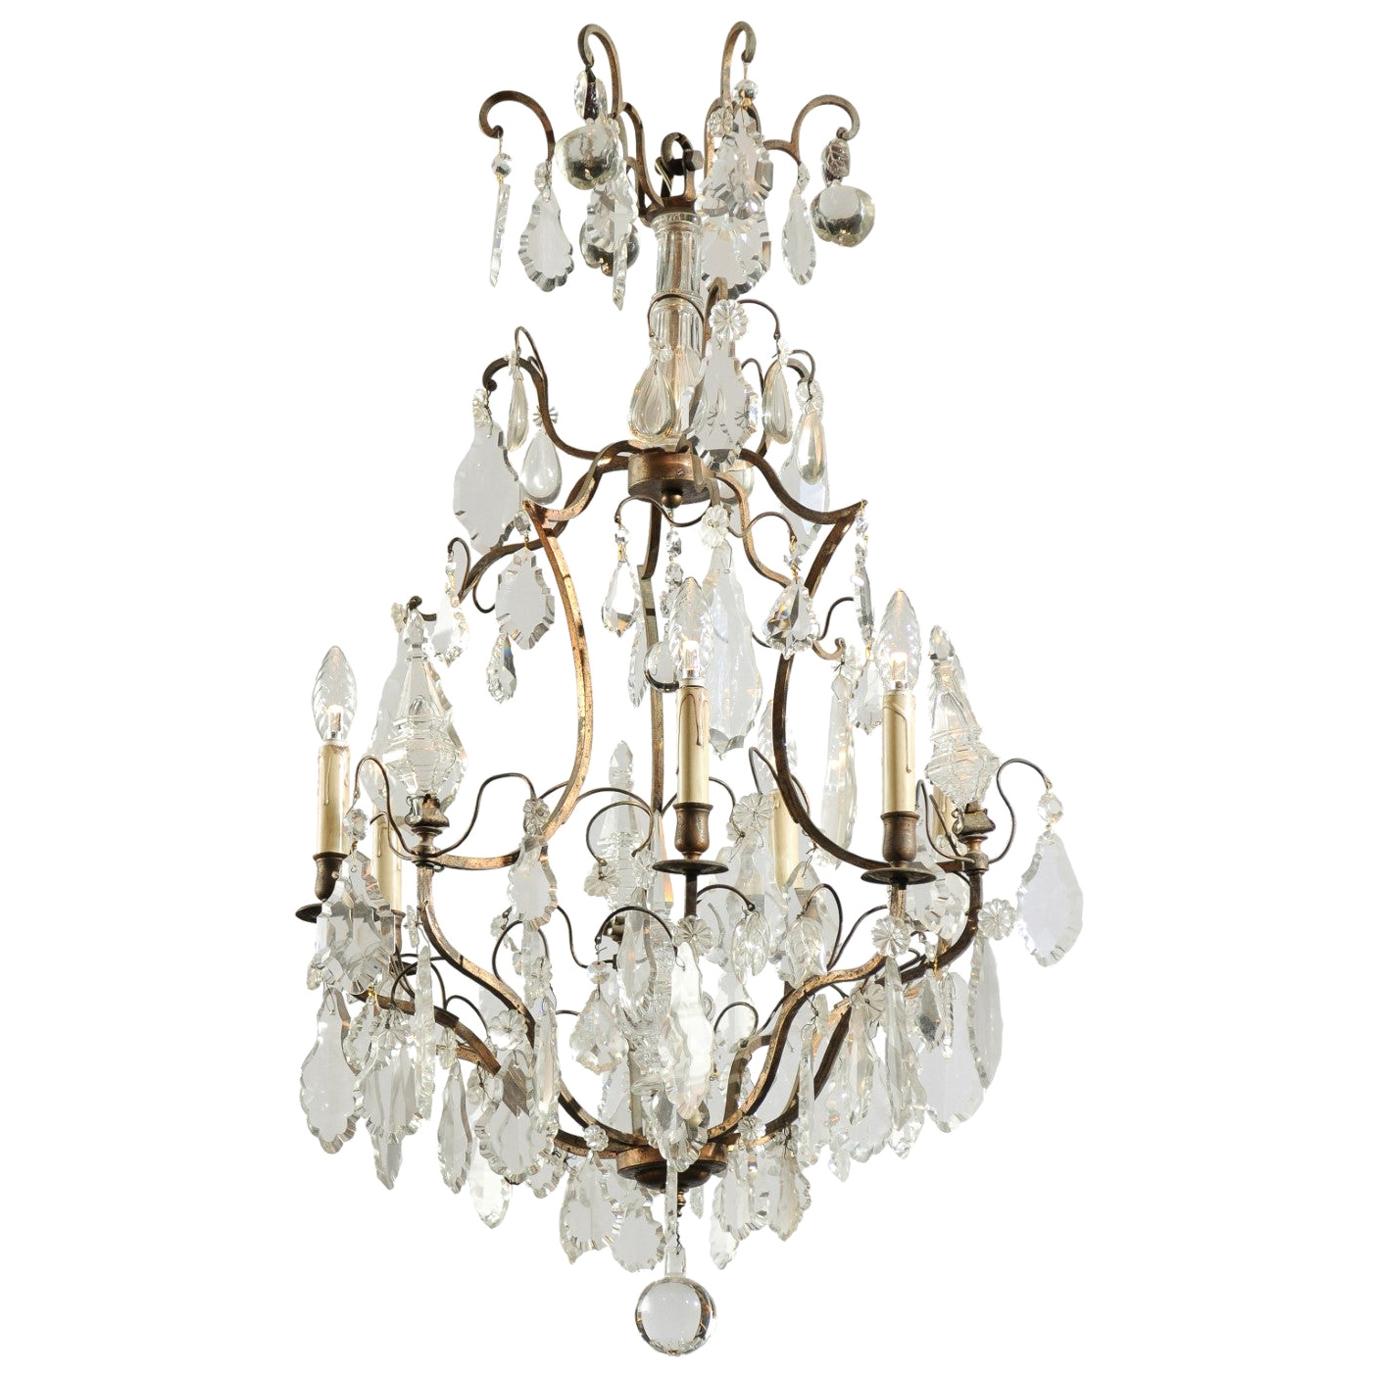 French Six-Light Crystal and Iron Chandelier with Obelisks, Late 19th Century For Sale